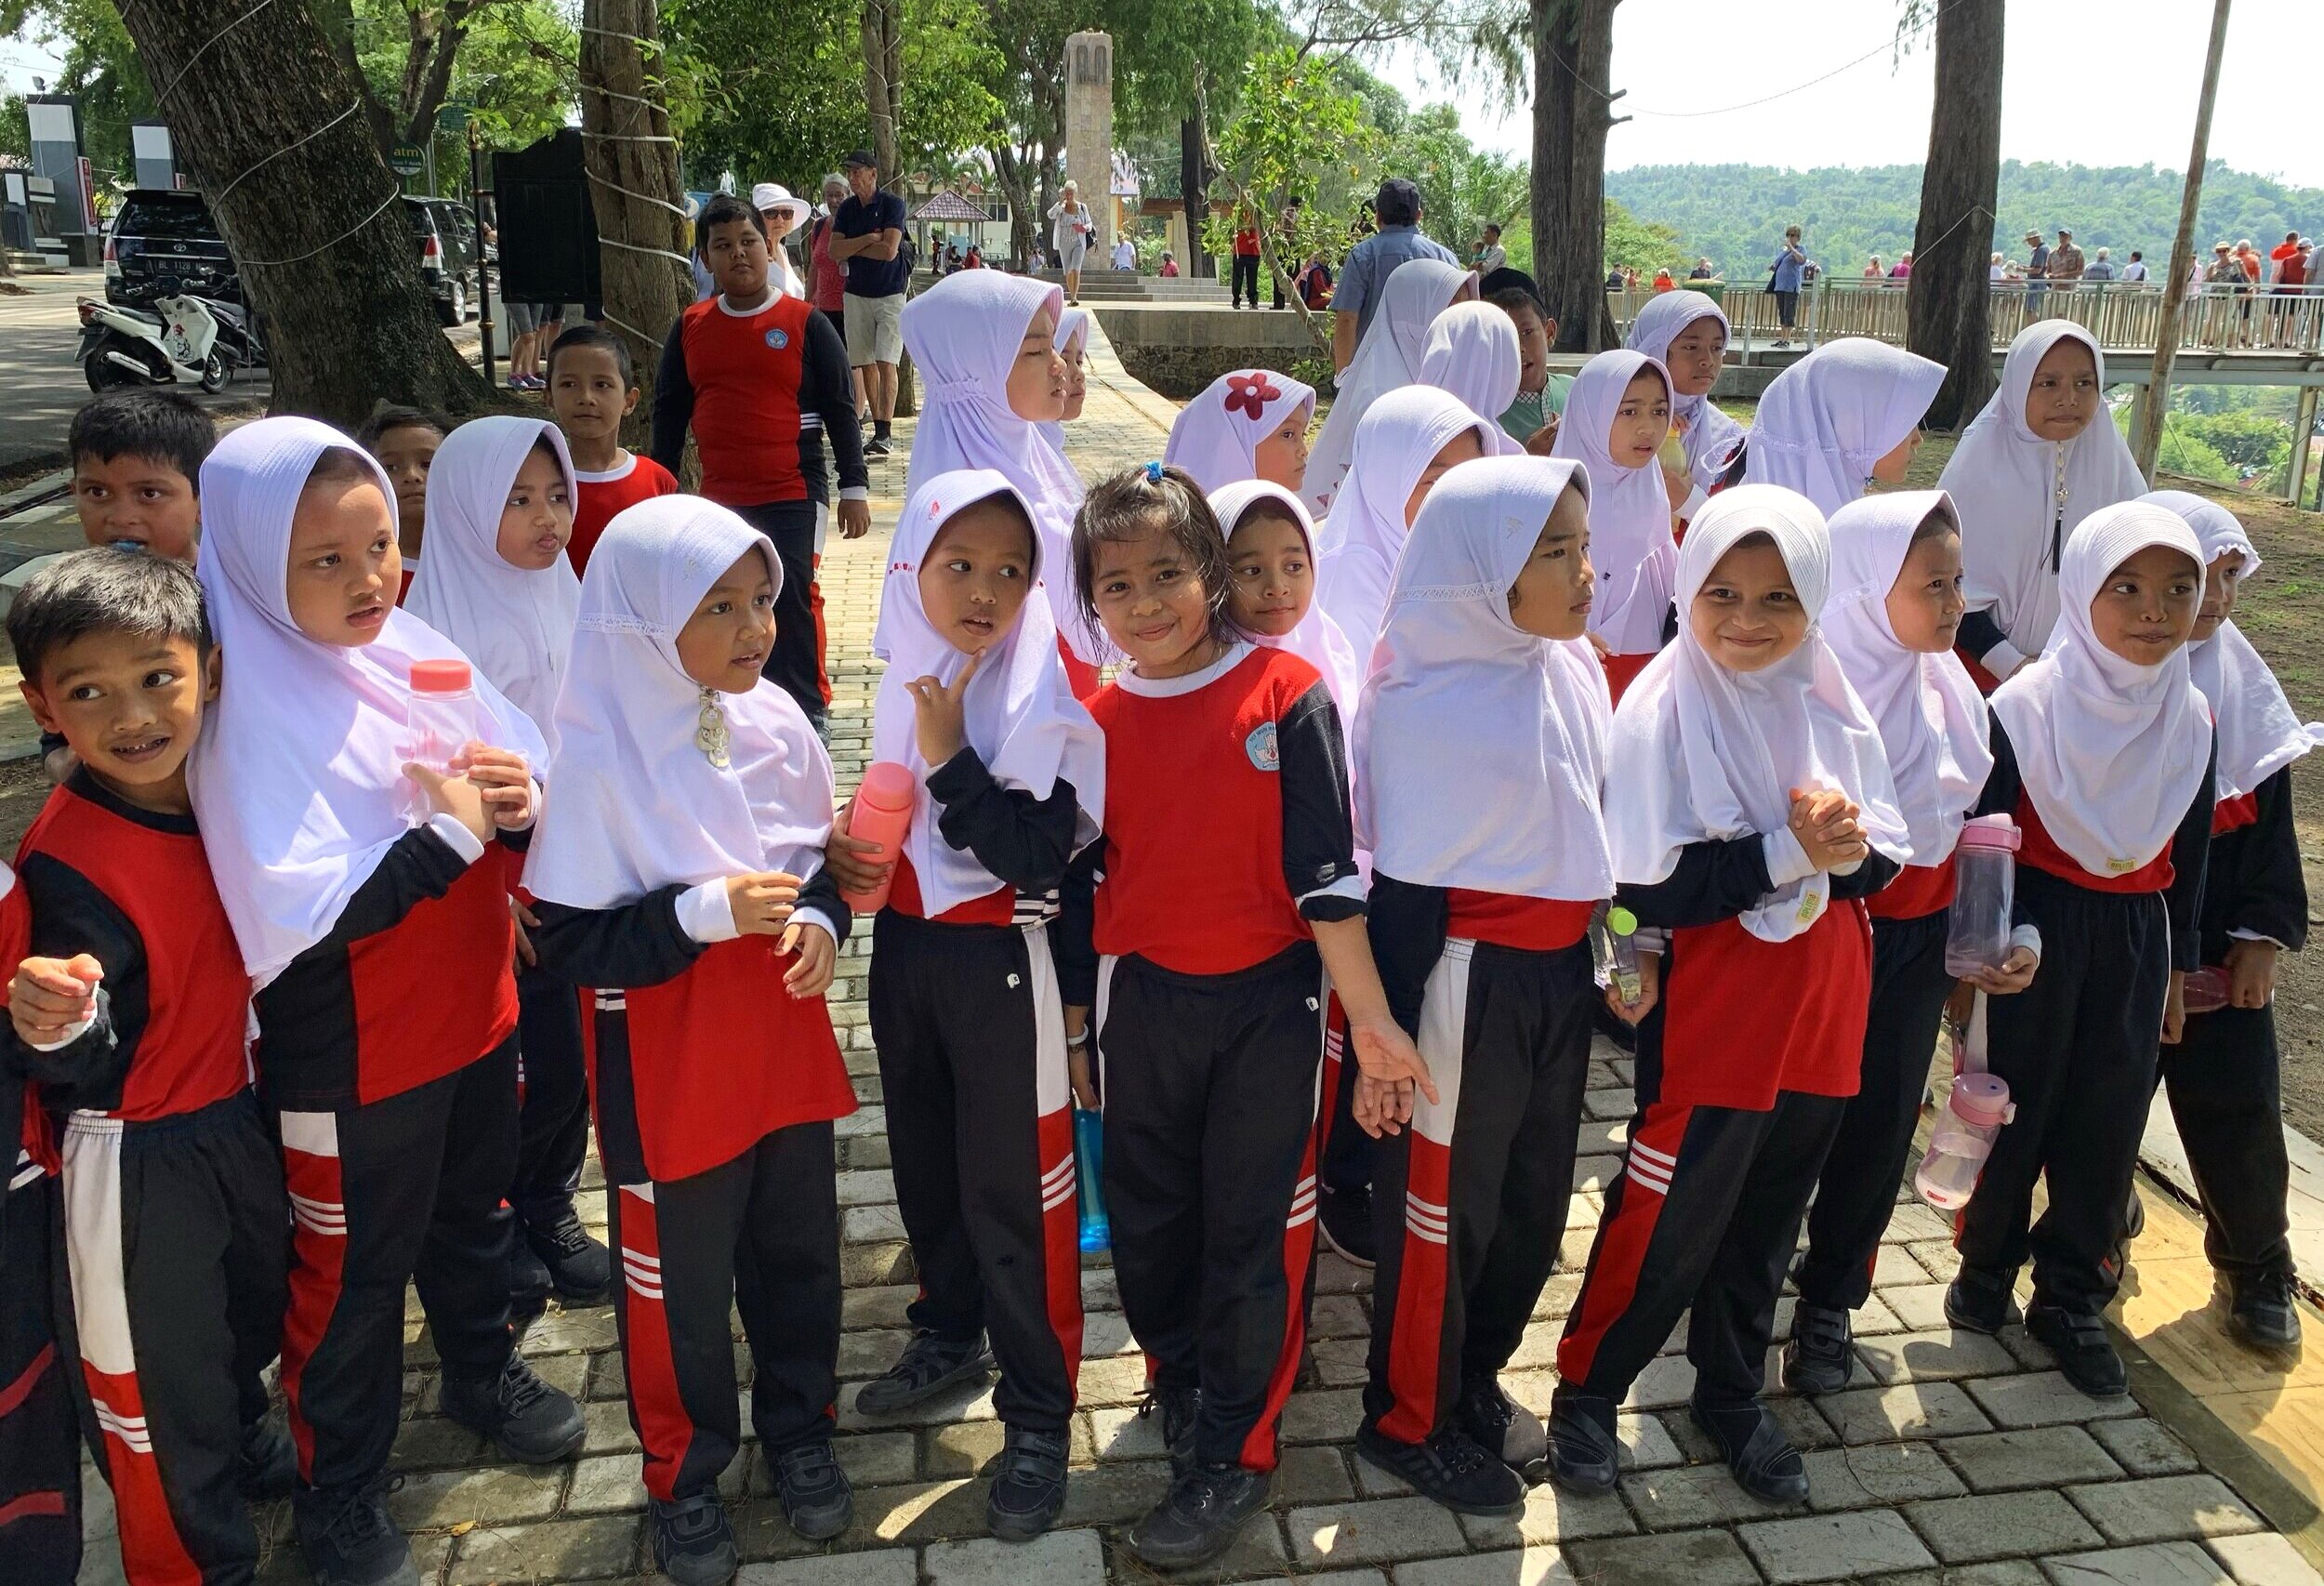  Another group of school children near the park.  